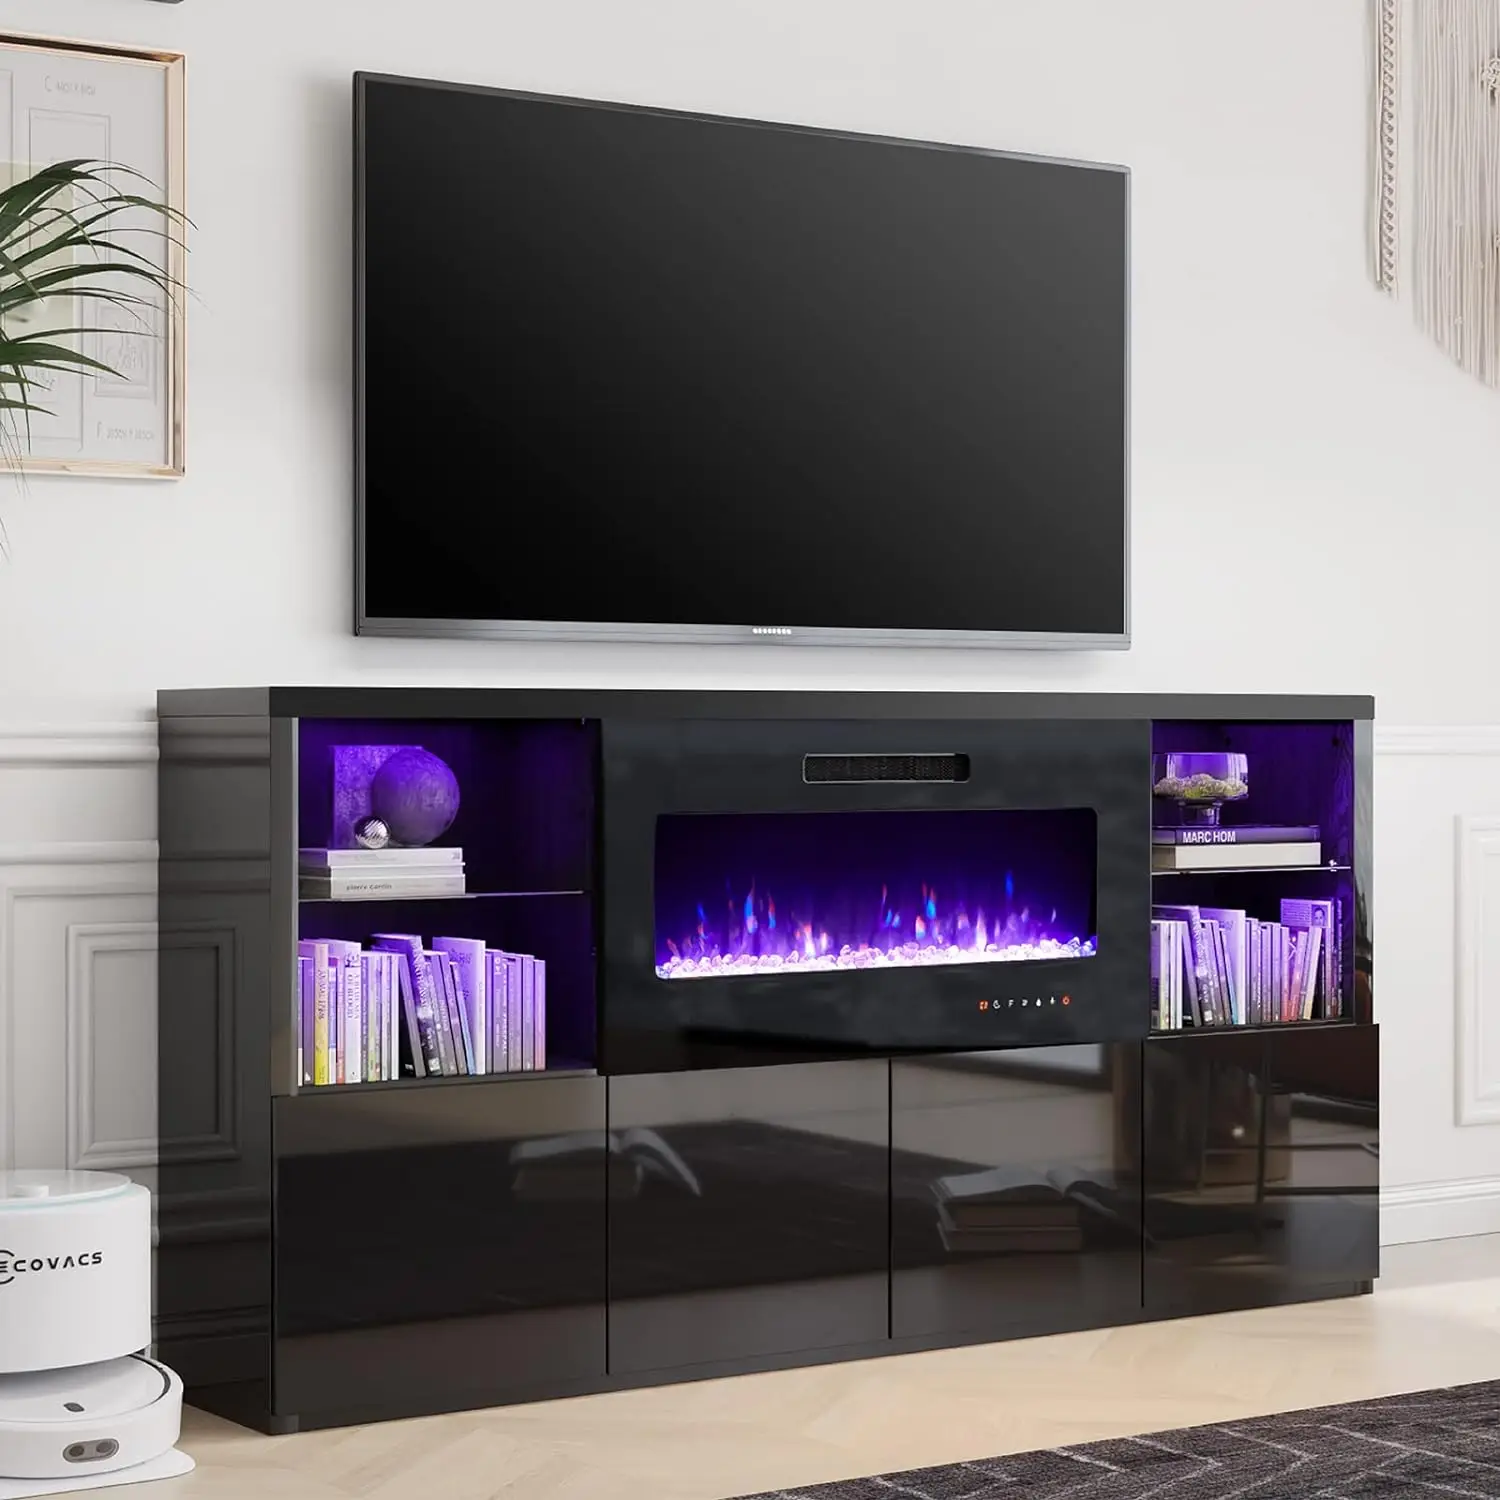 

Fireplace TV Stand for TVs up to 75", Modern High Gloss Entertainment Center with 40" Fireplace, 4 Shelves&Storage Cabinets